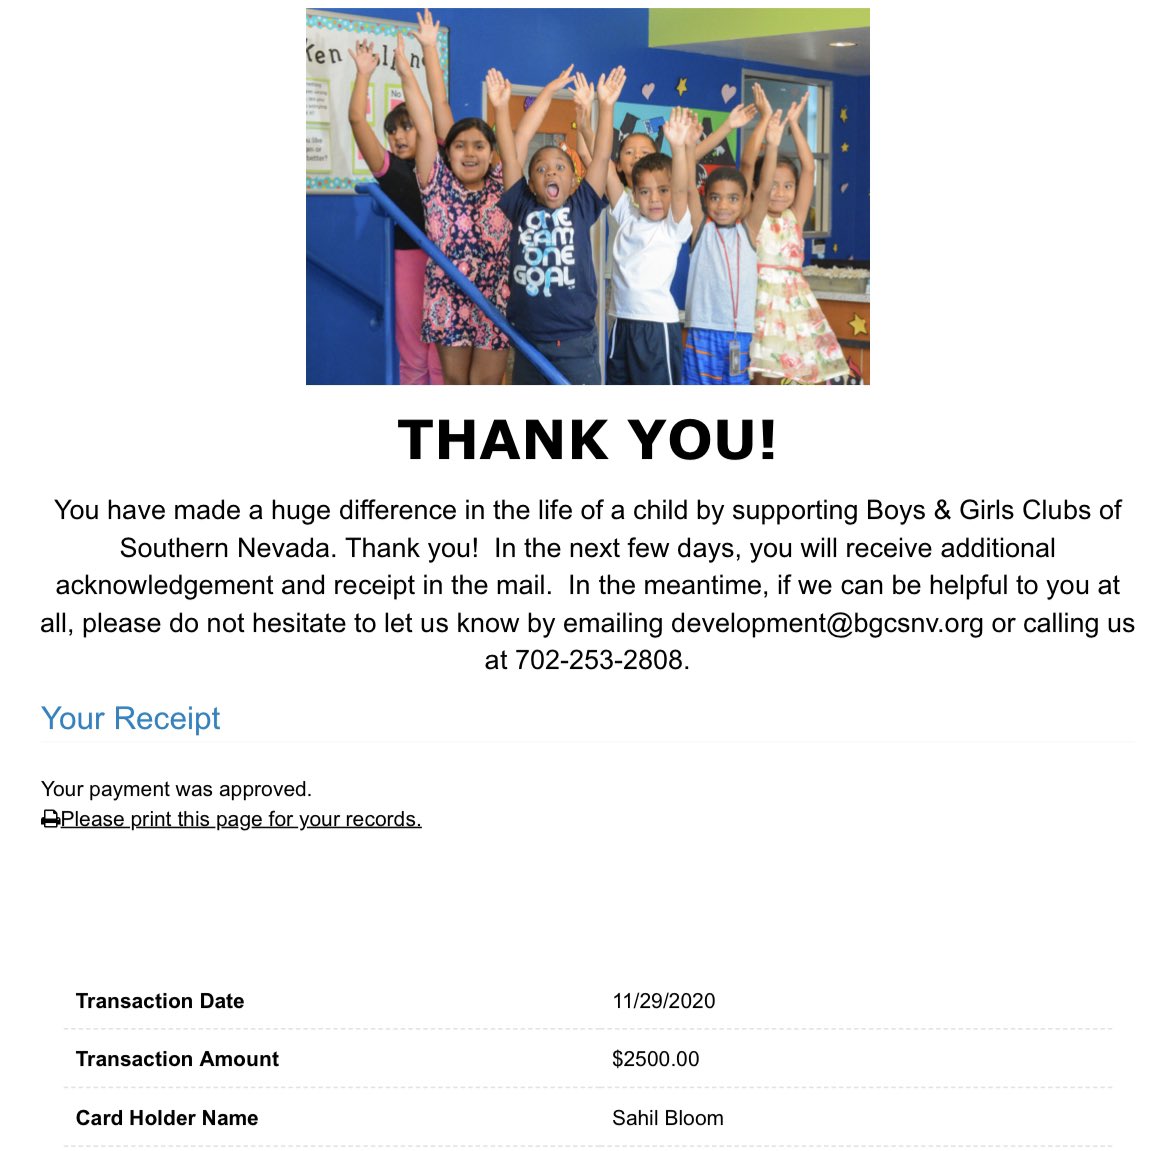 16/ Update: We have now raised over $5,000 for The Boys & Girls Club of Southern Nevada in celebration of Tony’s life and legacy. As promised, my matching contribution is below. Thank you everyone for the generous donations! Keep it going.